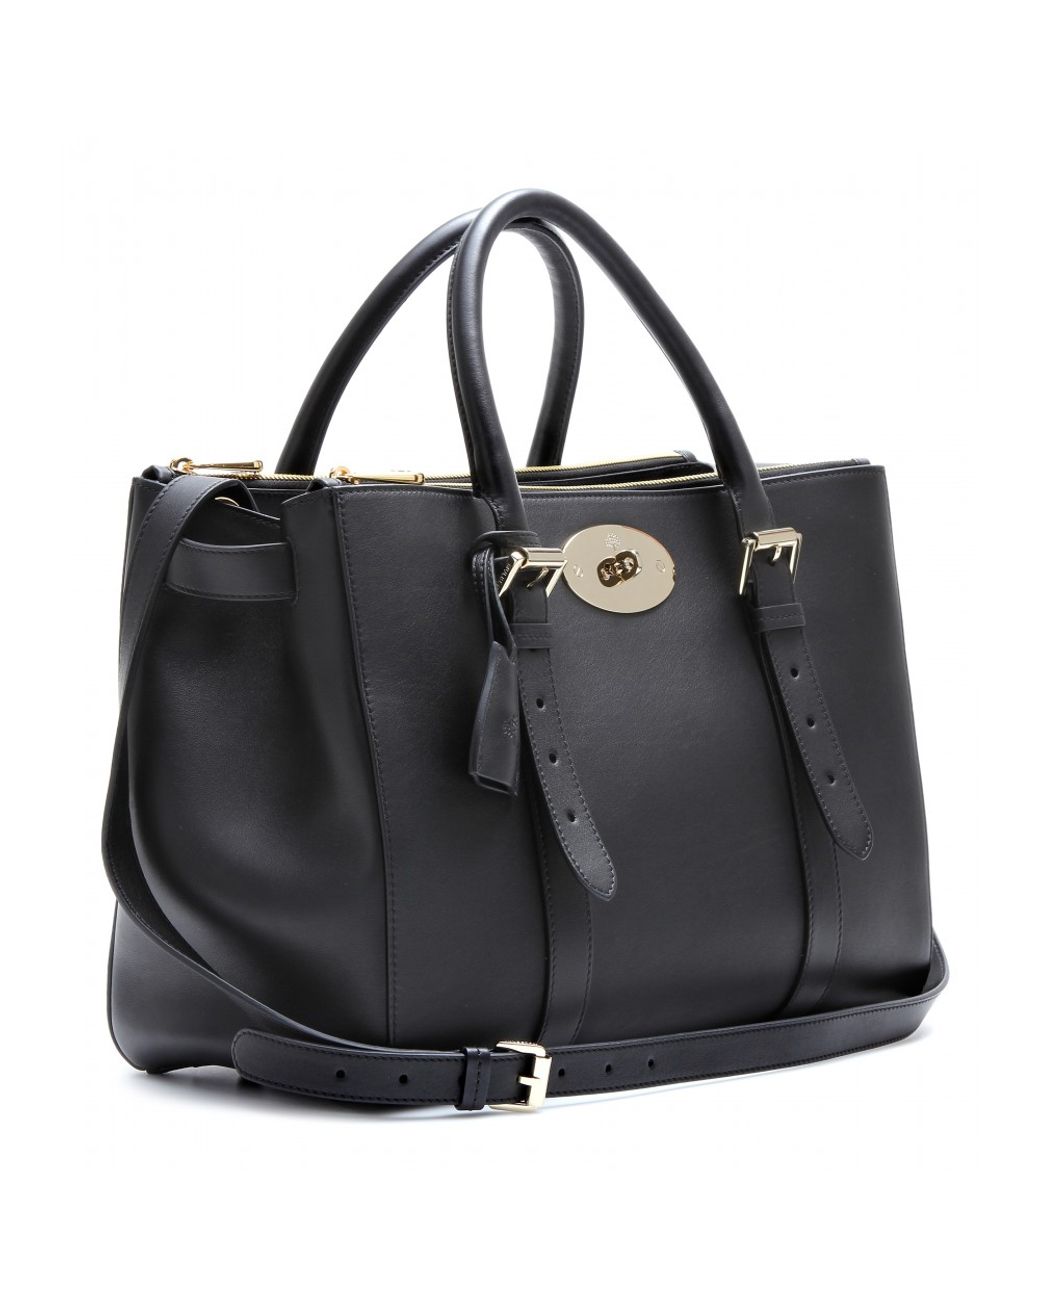 Mulberry Bayswater Double Zip Leather Tote in Black | Lyst